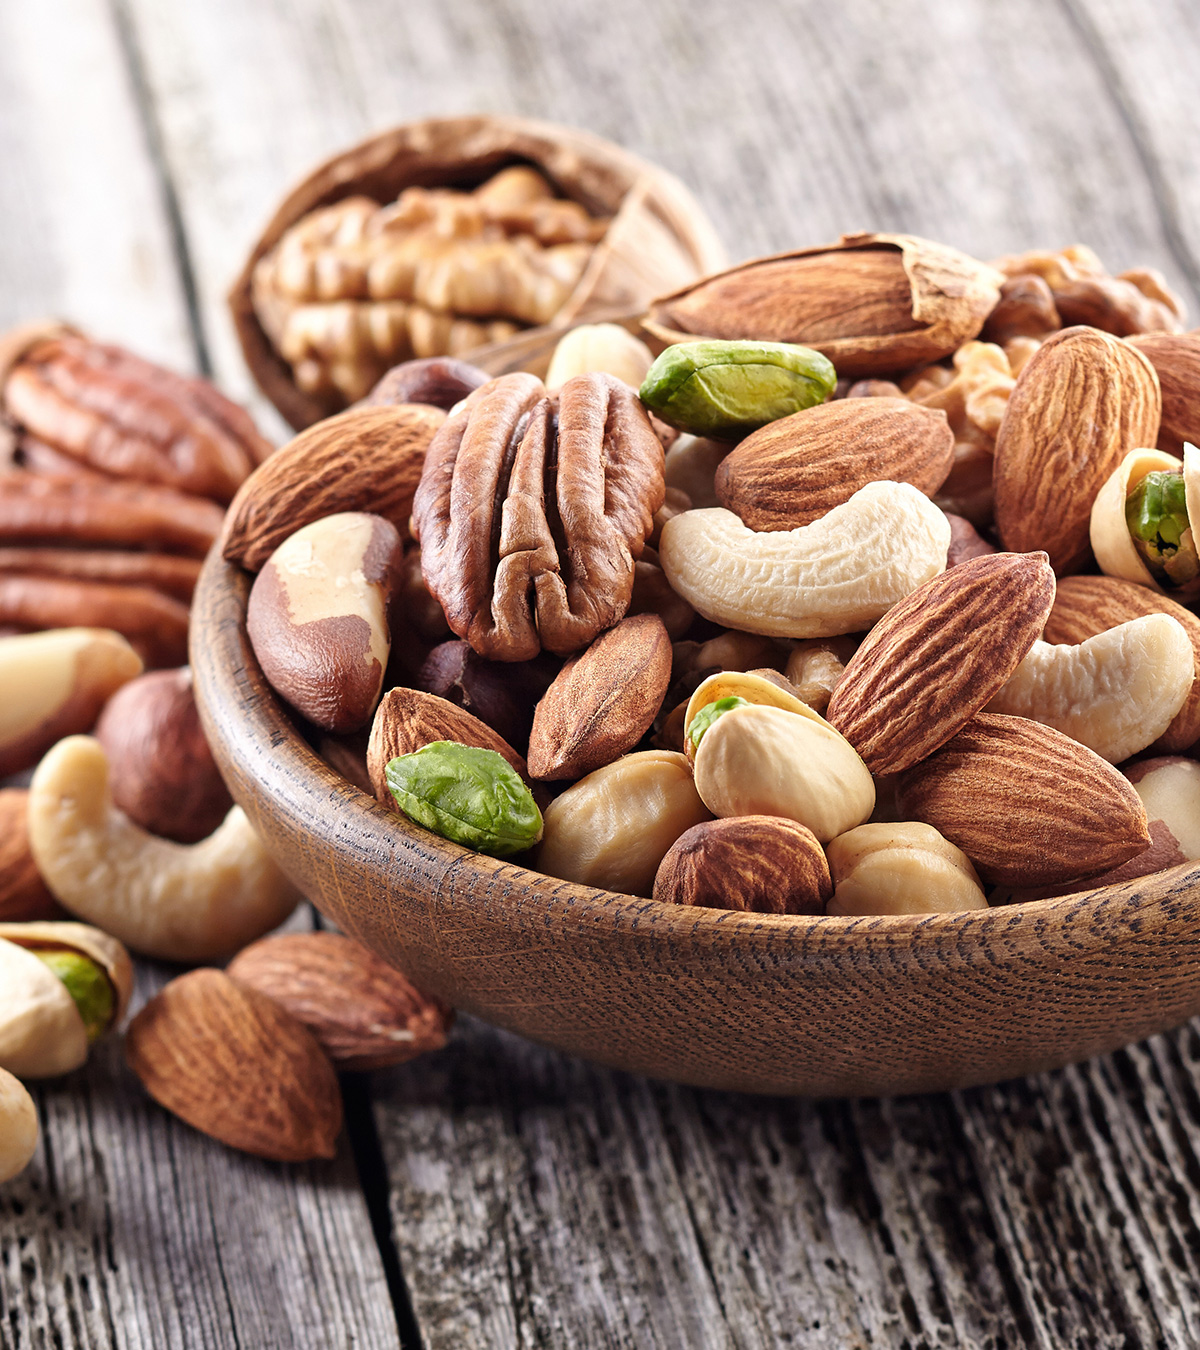 Nuts For Babies: When To Introduce, Benefits, And Recipes